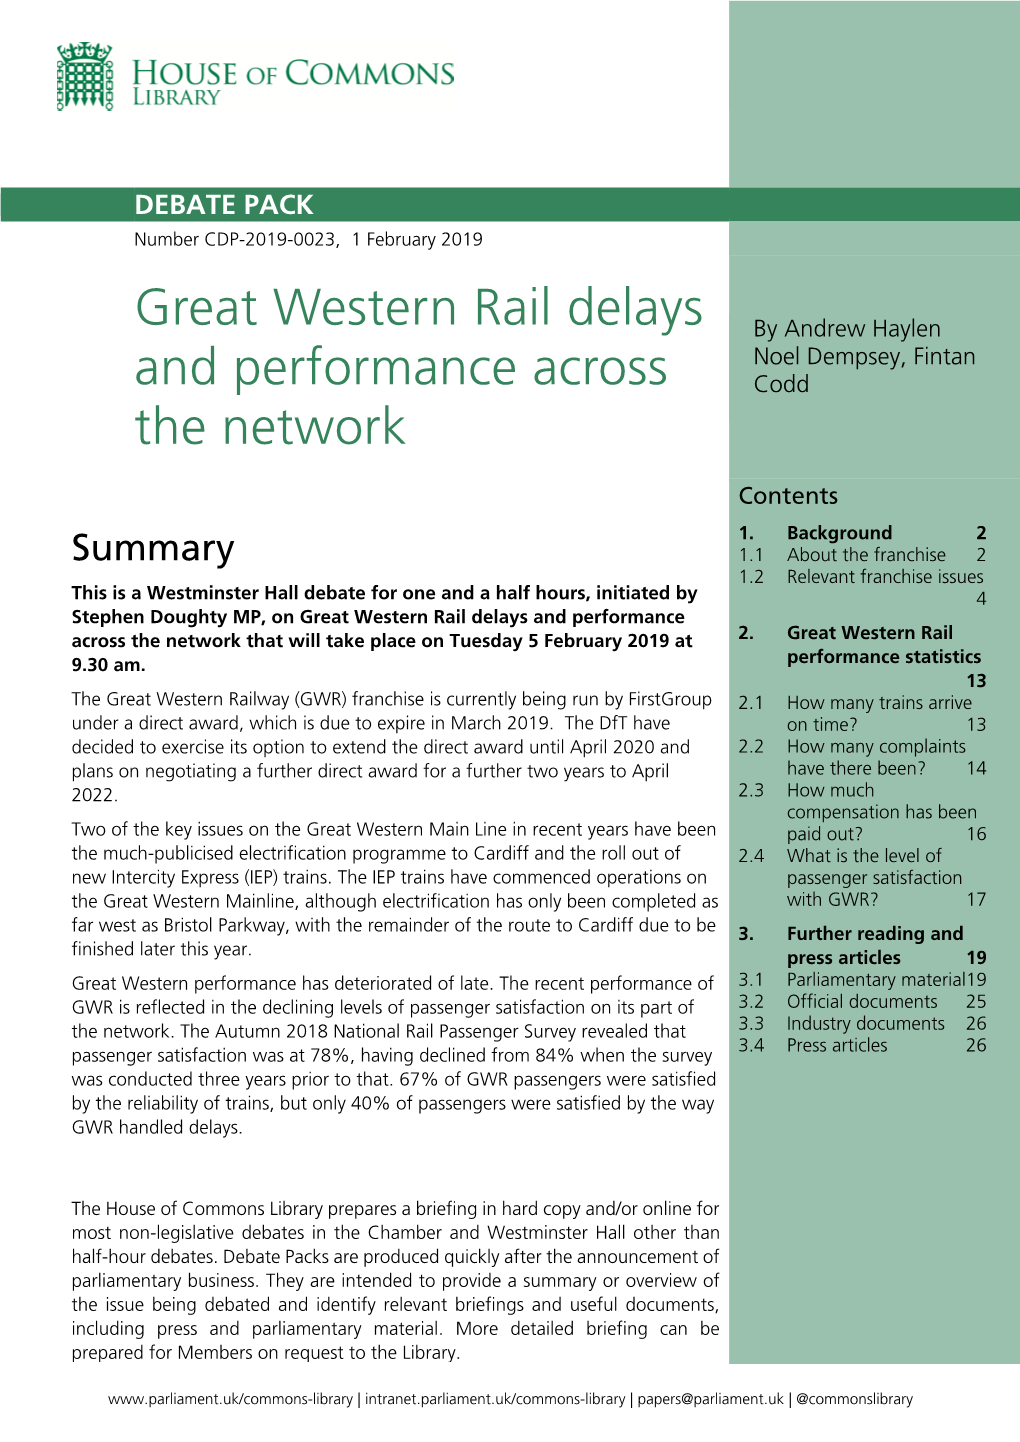 Great Western Rail Delays and Performance Across the Network That Will Take Place on Tuesday 5 February 2019 at 2